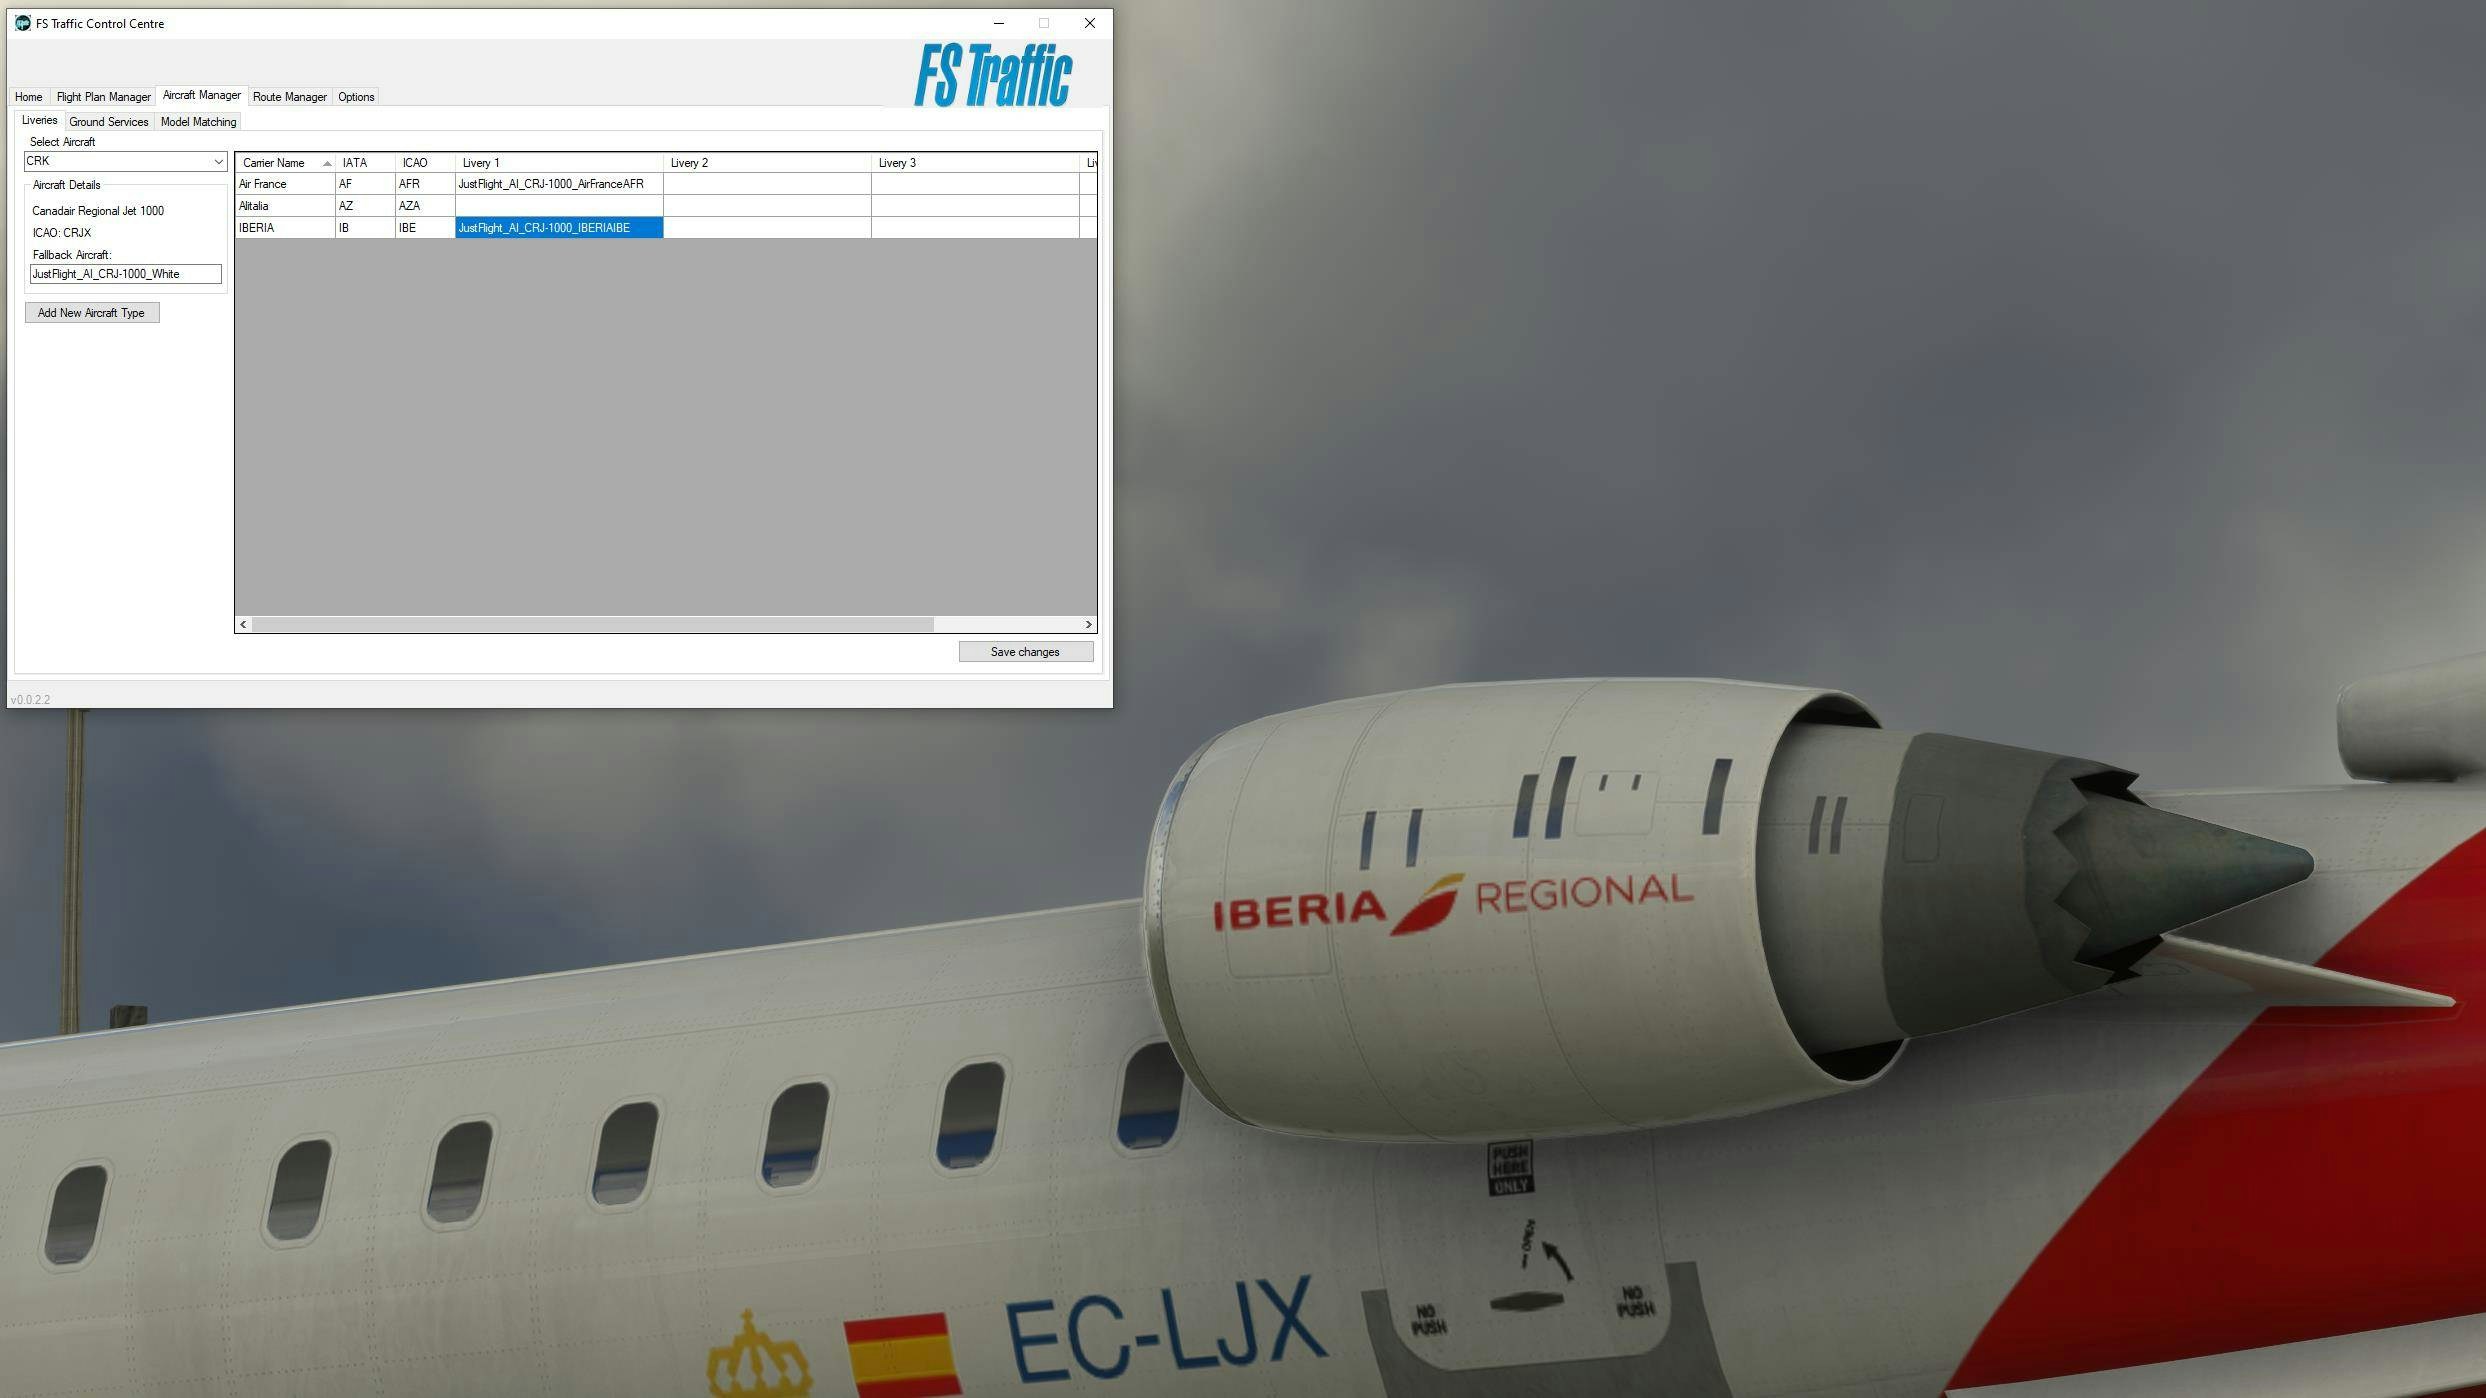 Just Flight Releases FS Traffic for MSFS